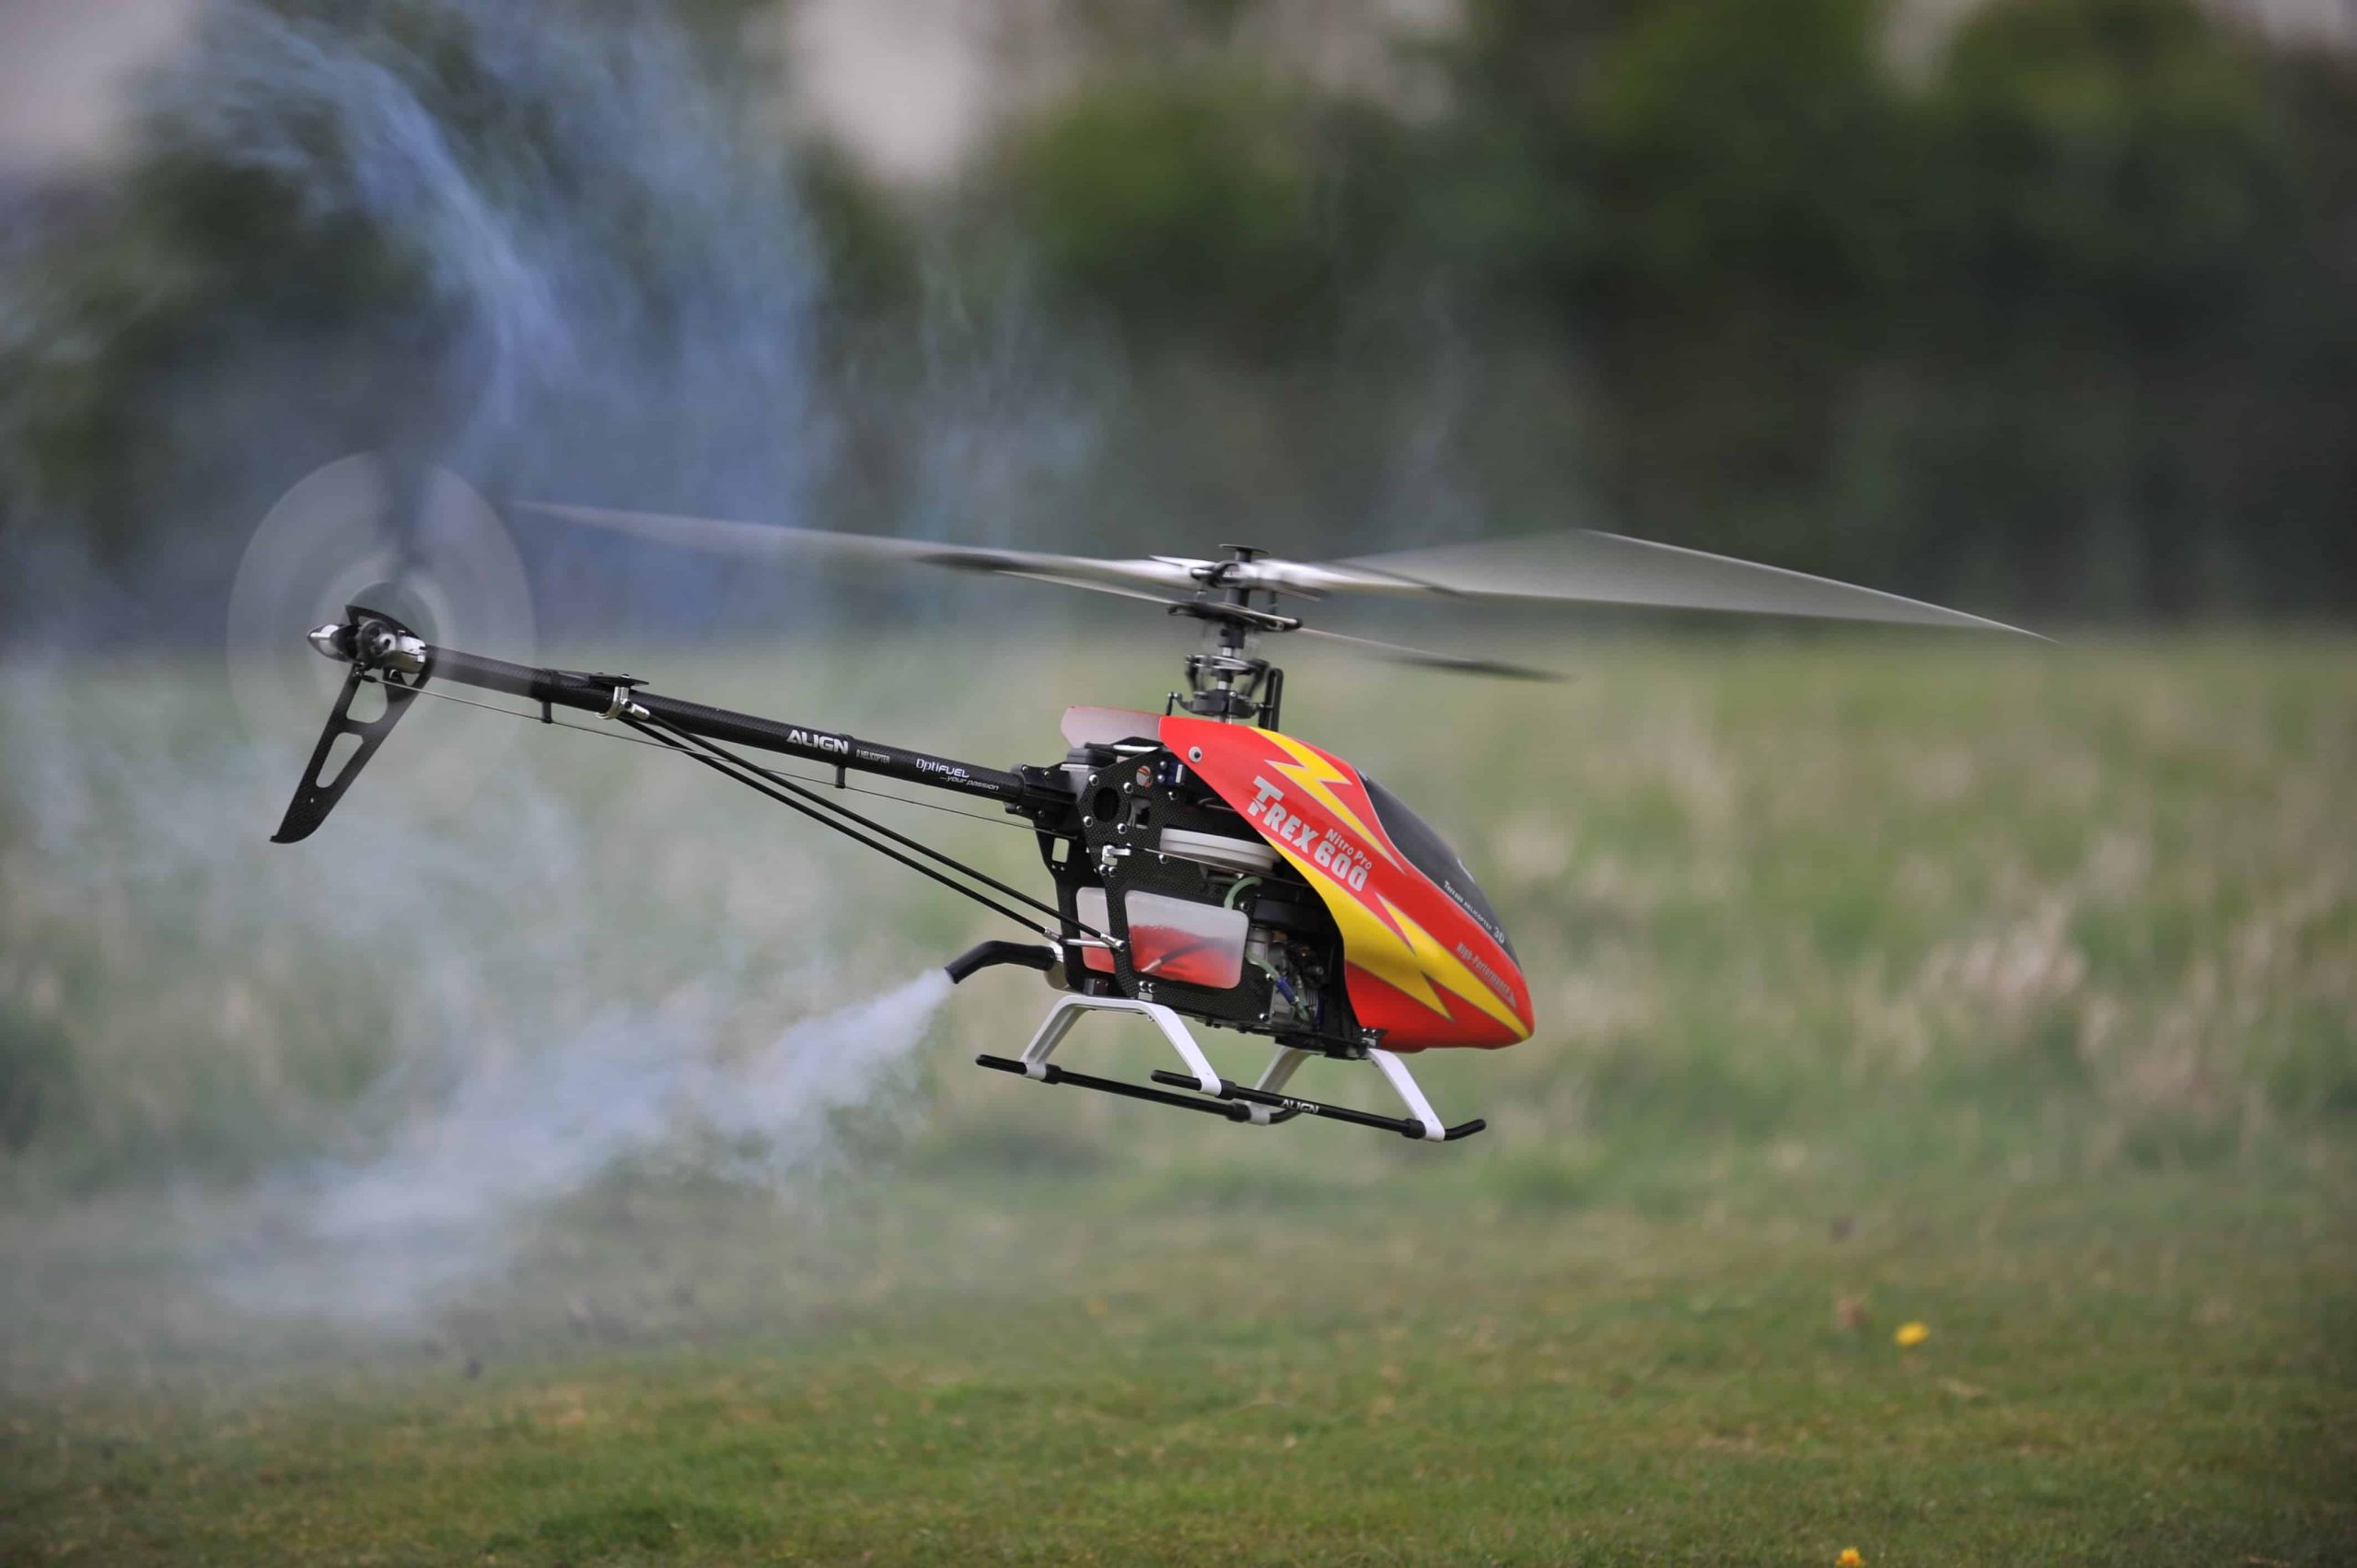 rc camera helicopter